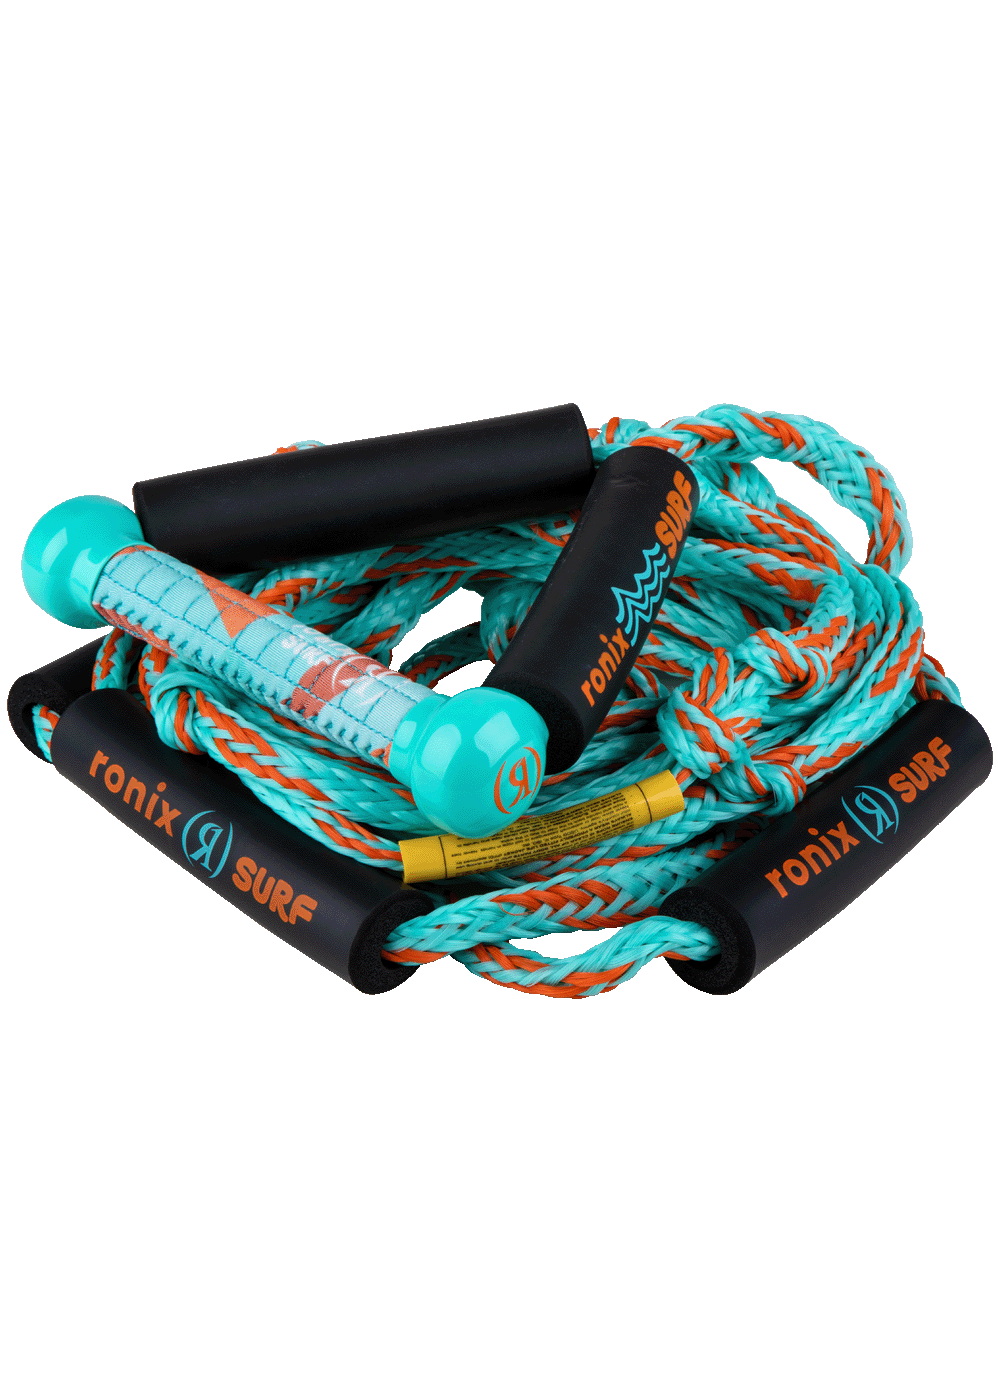 Ronix Bungee Kid's Surf Rope 25 Ft.